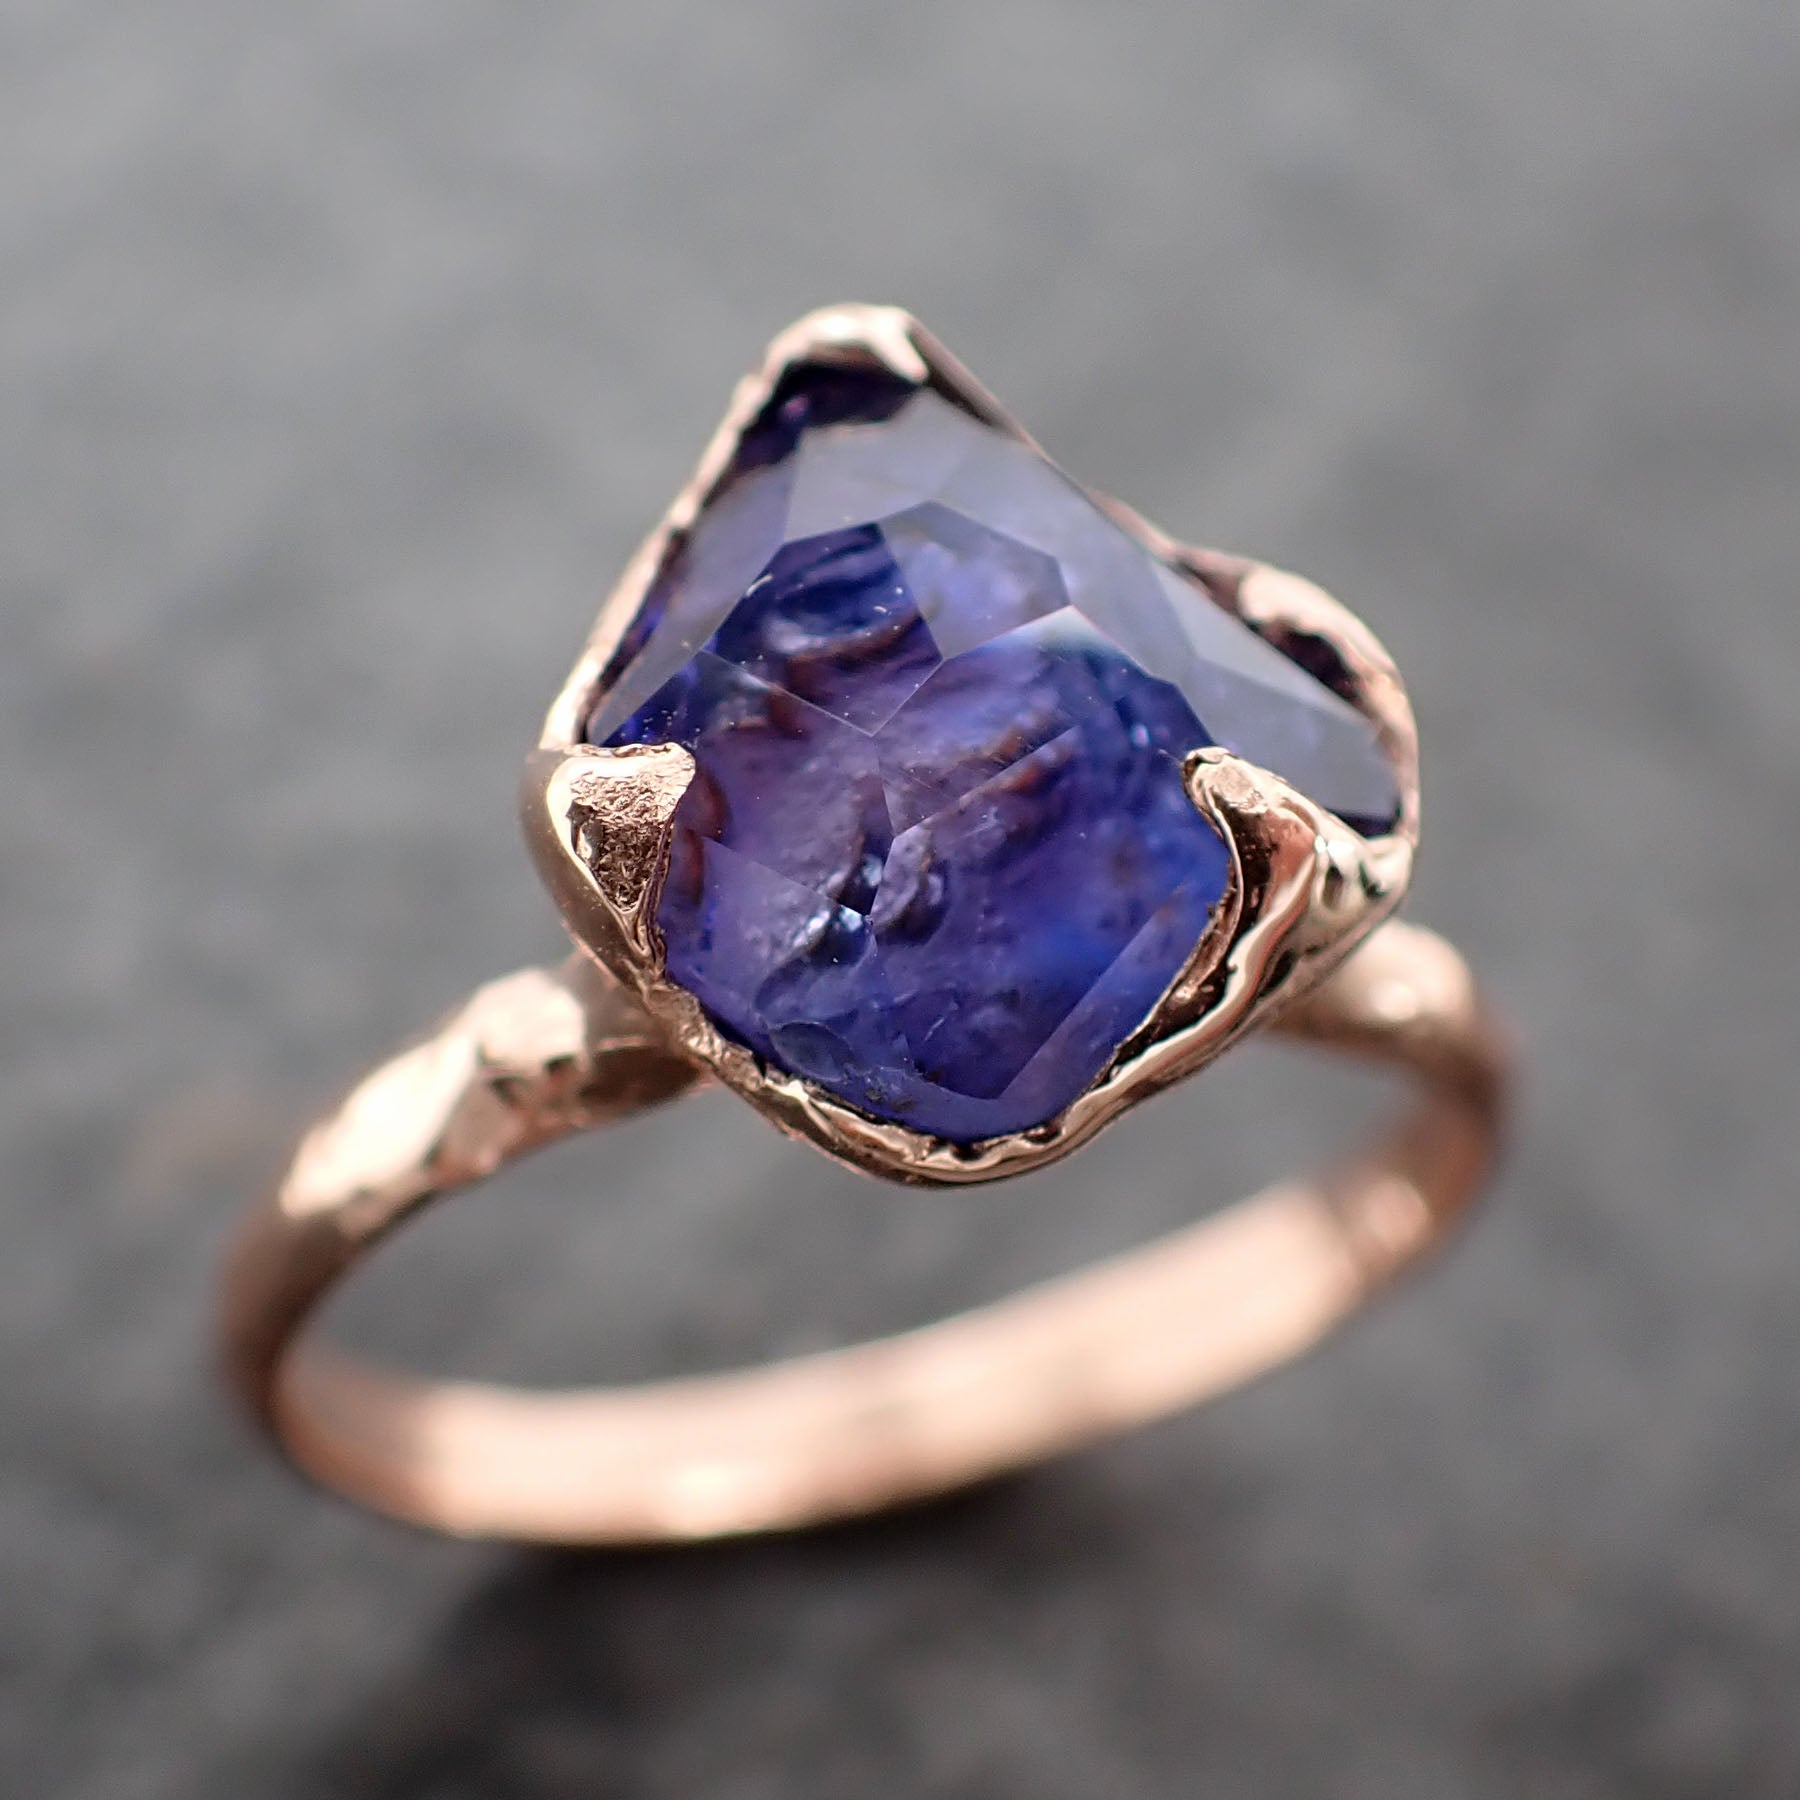 Partially Faceted Purple Sapphire 14k rose Gold Engagement Ring Wedding Ring Custom One Of a Kind Gemstone Ring Solitaire 2538